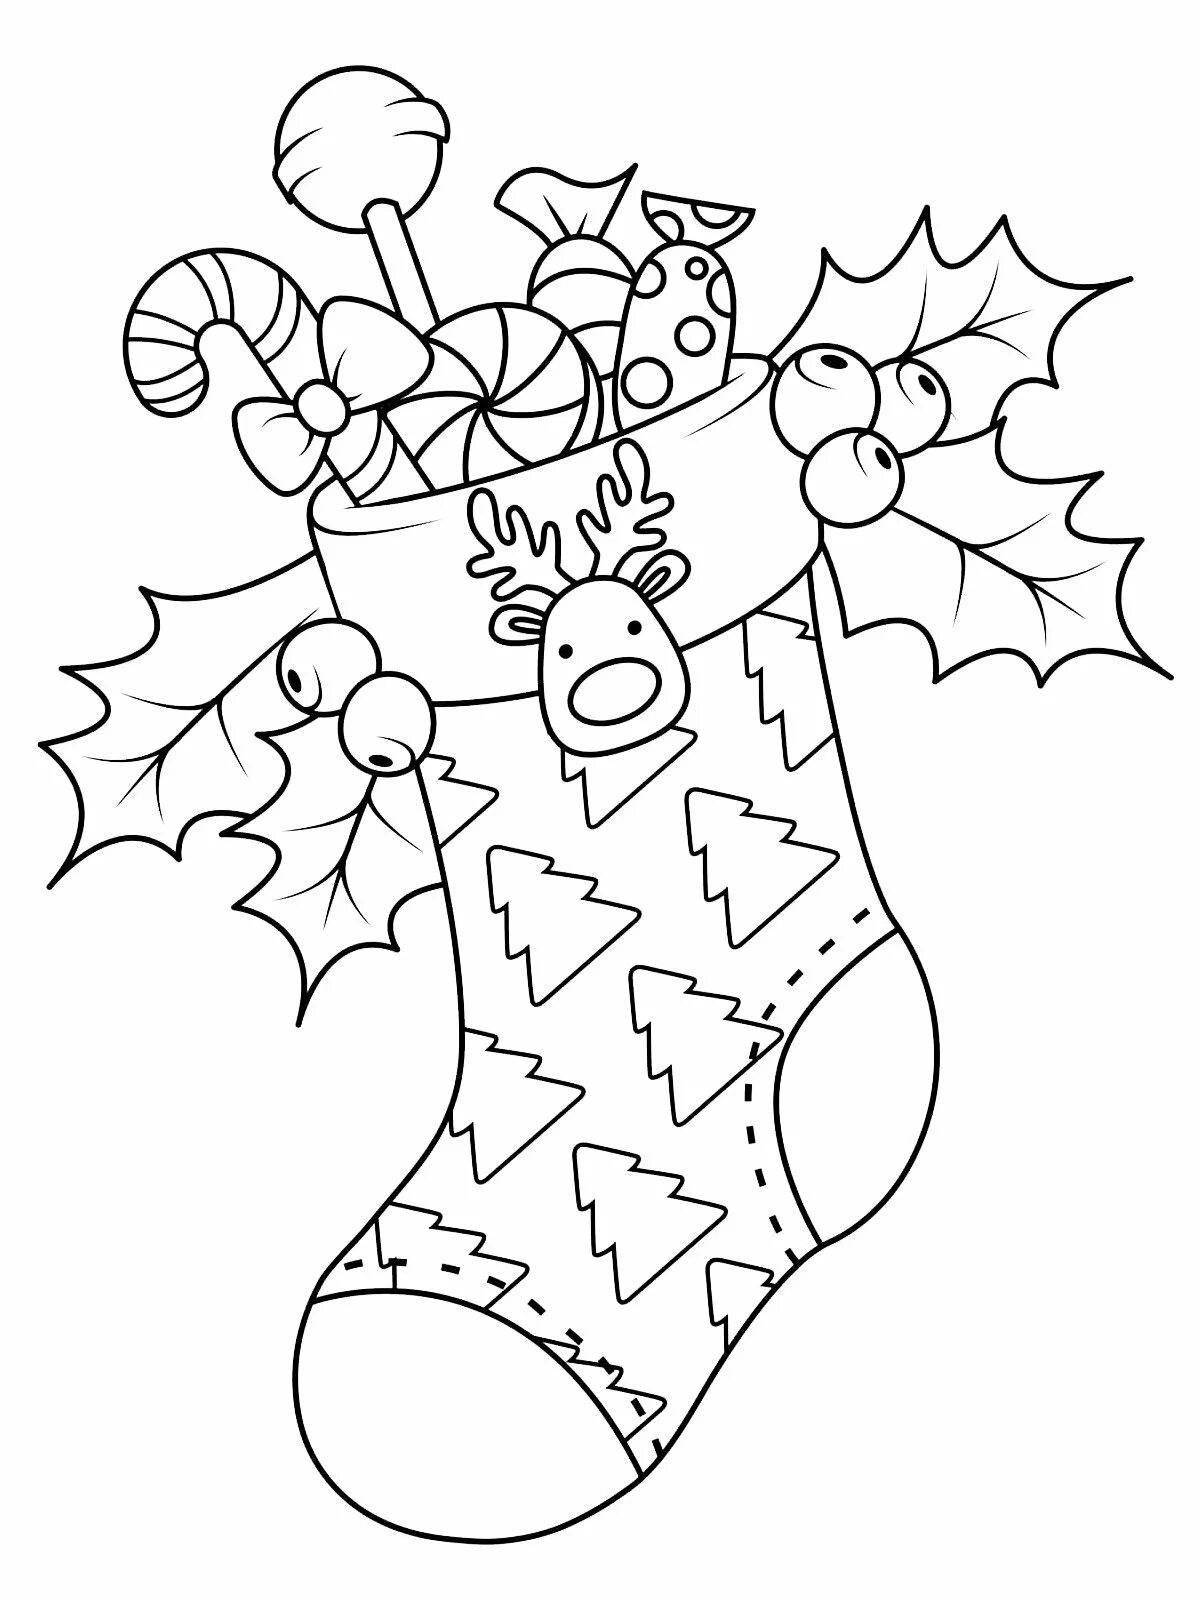 Glorious Christmas boot coloring page